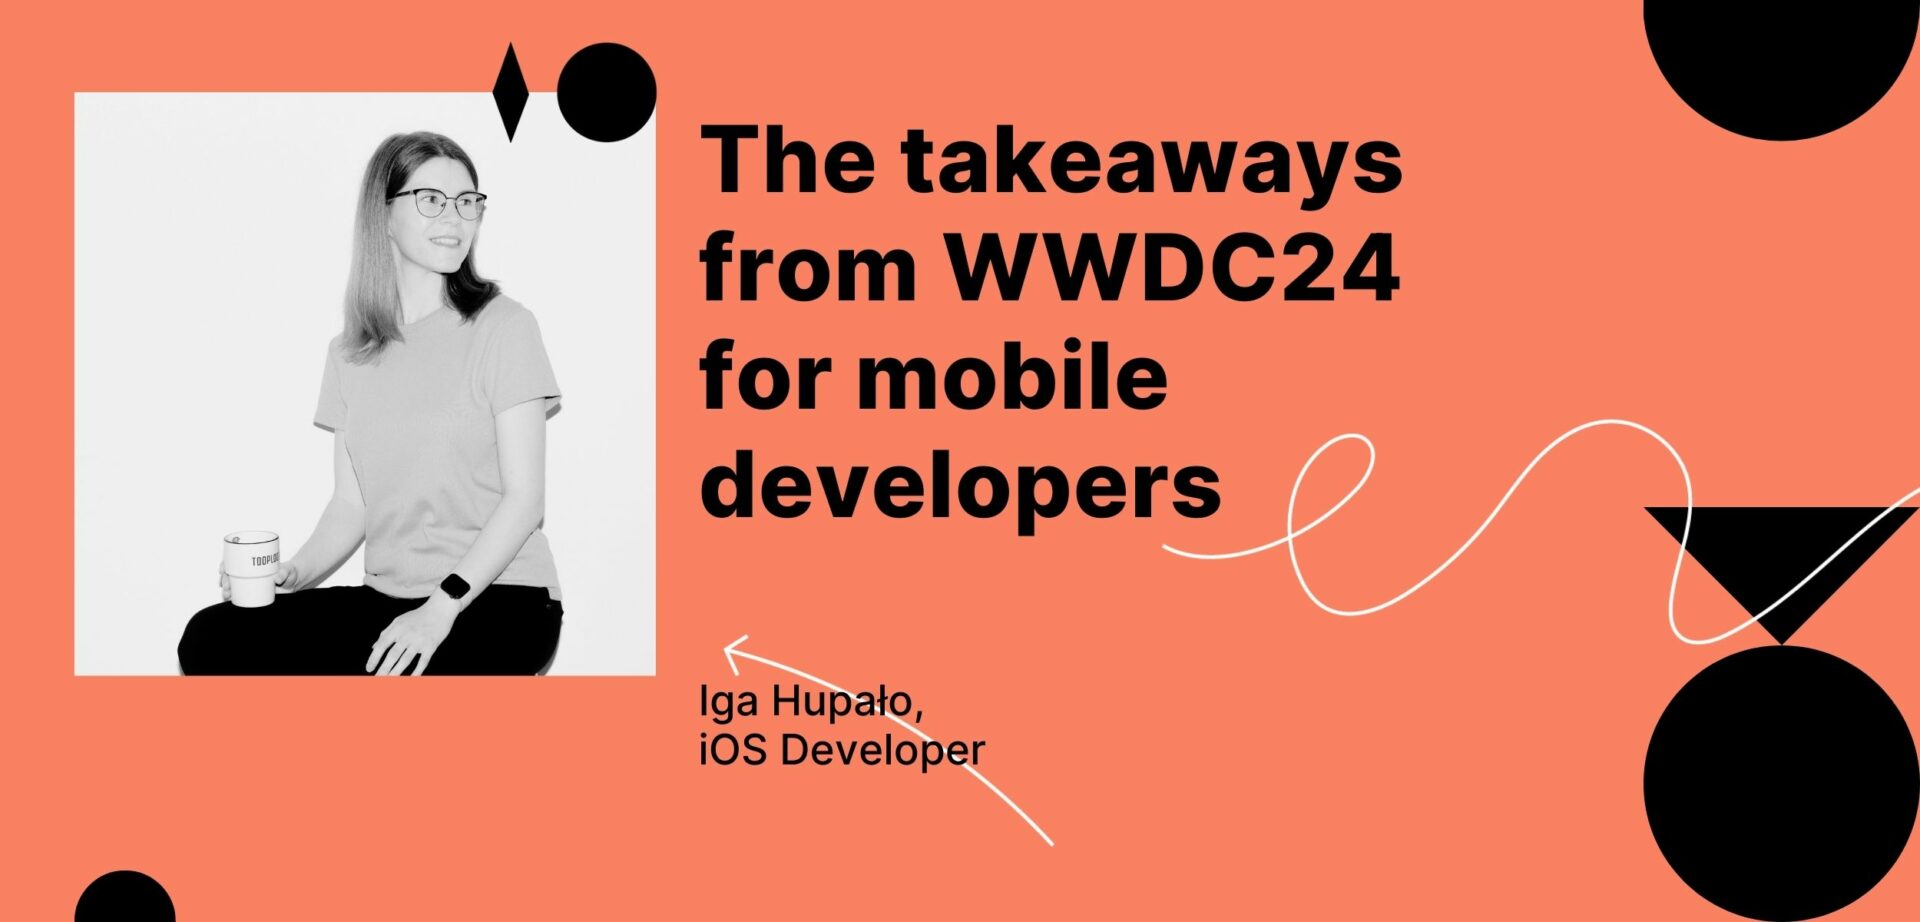 The takeaways from WWDC24 for mobile developers